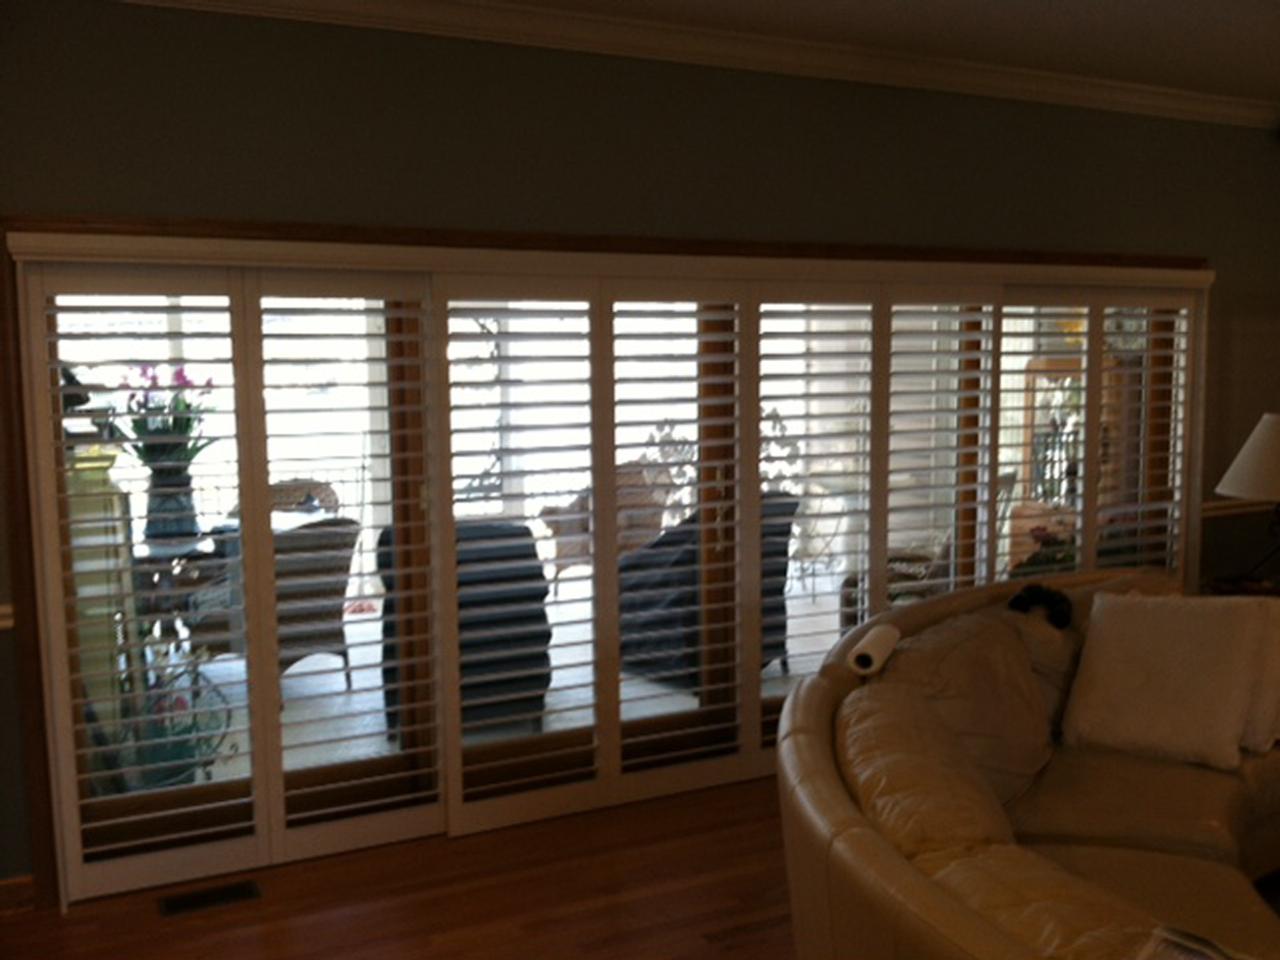 Bypass shutters on window and French doors